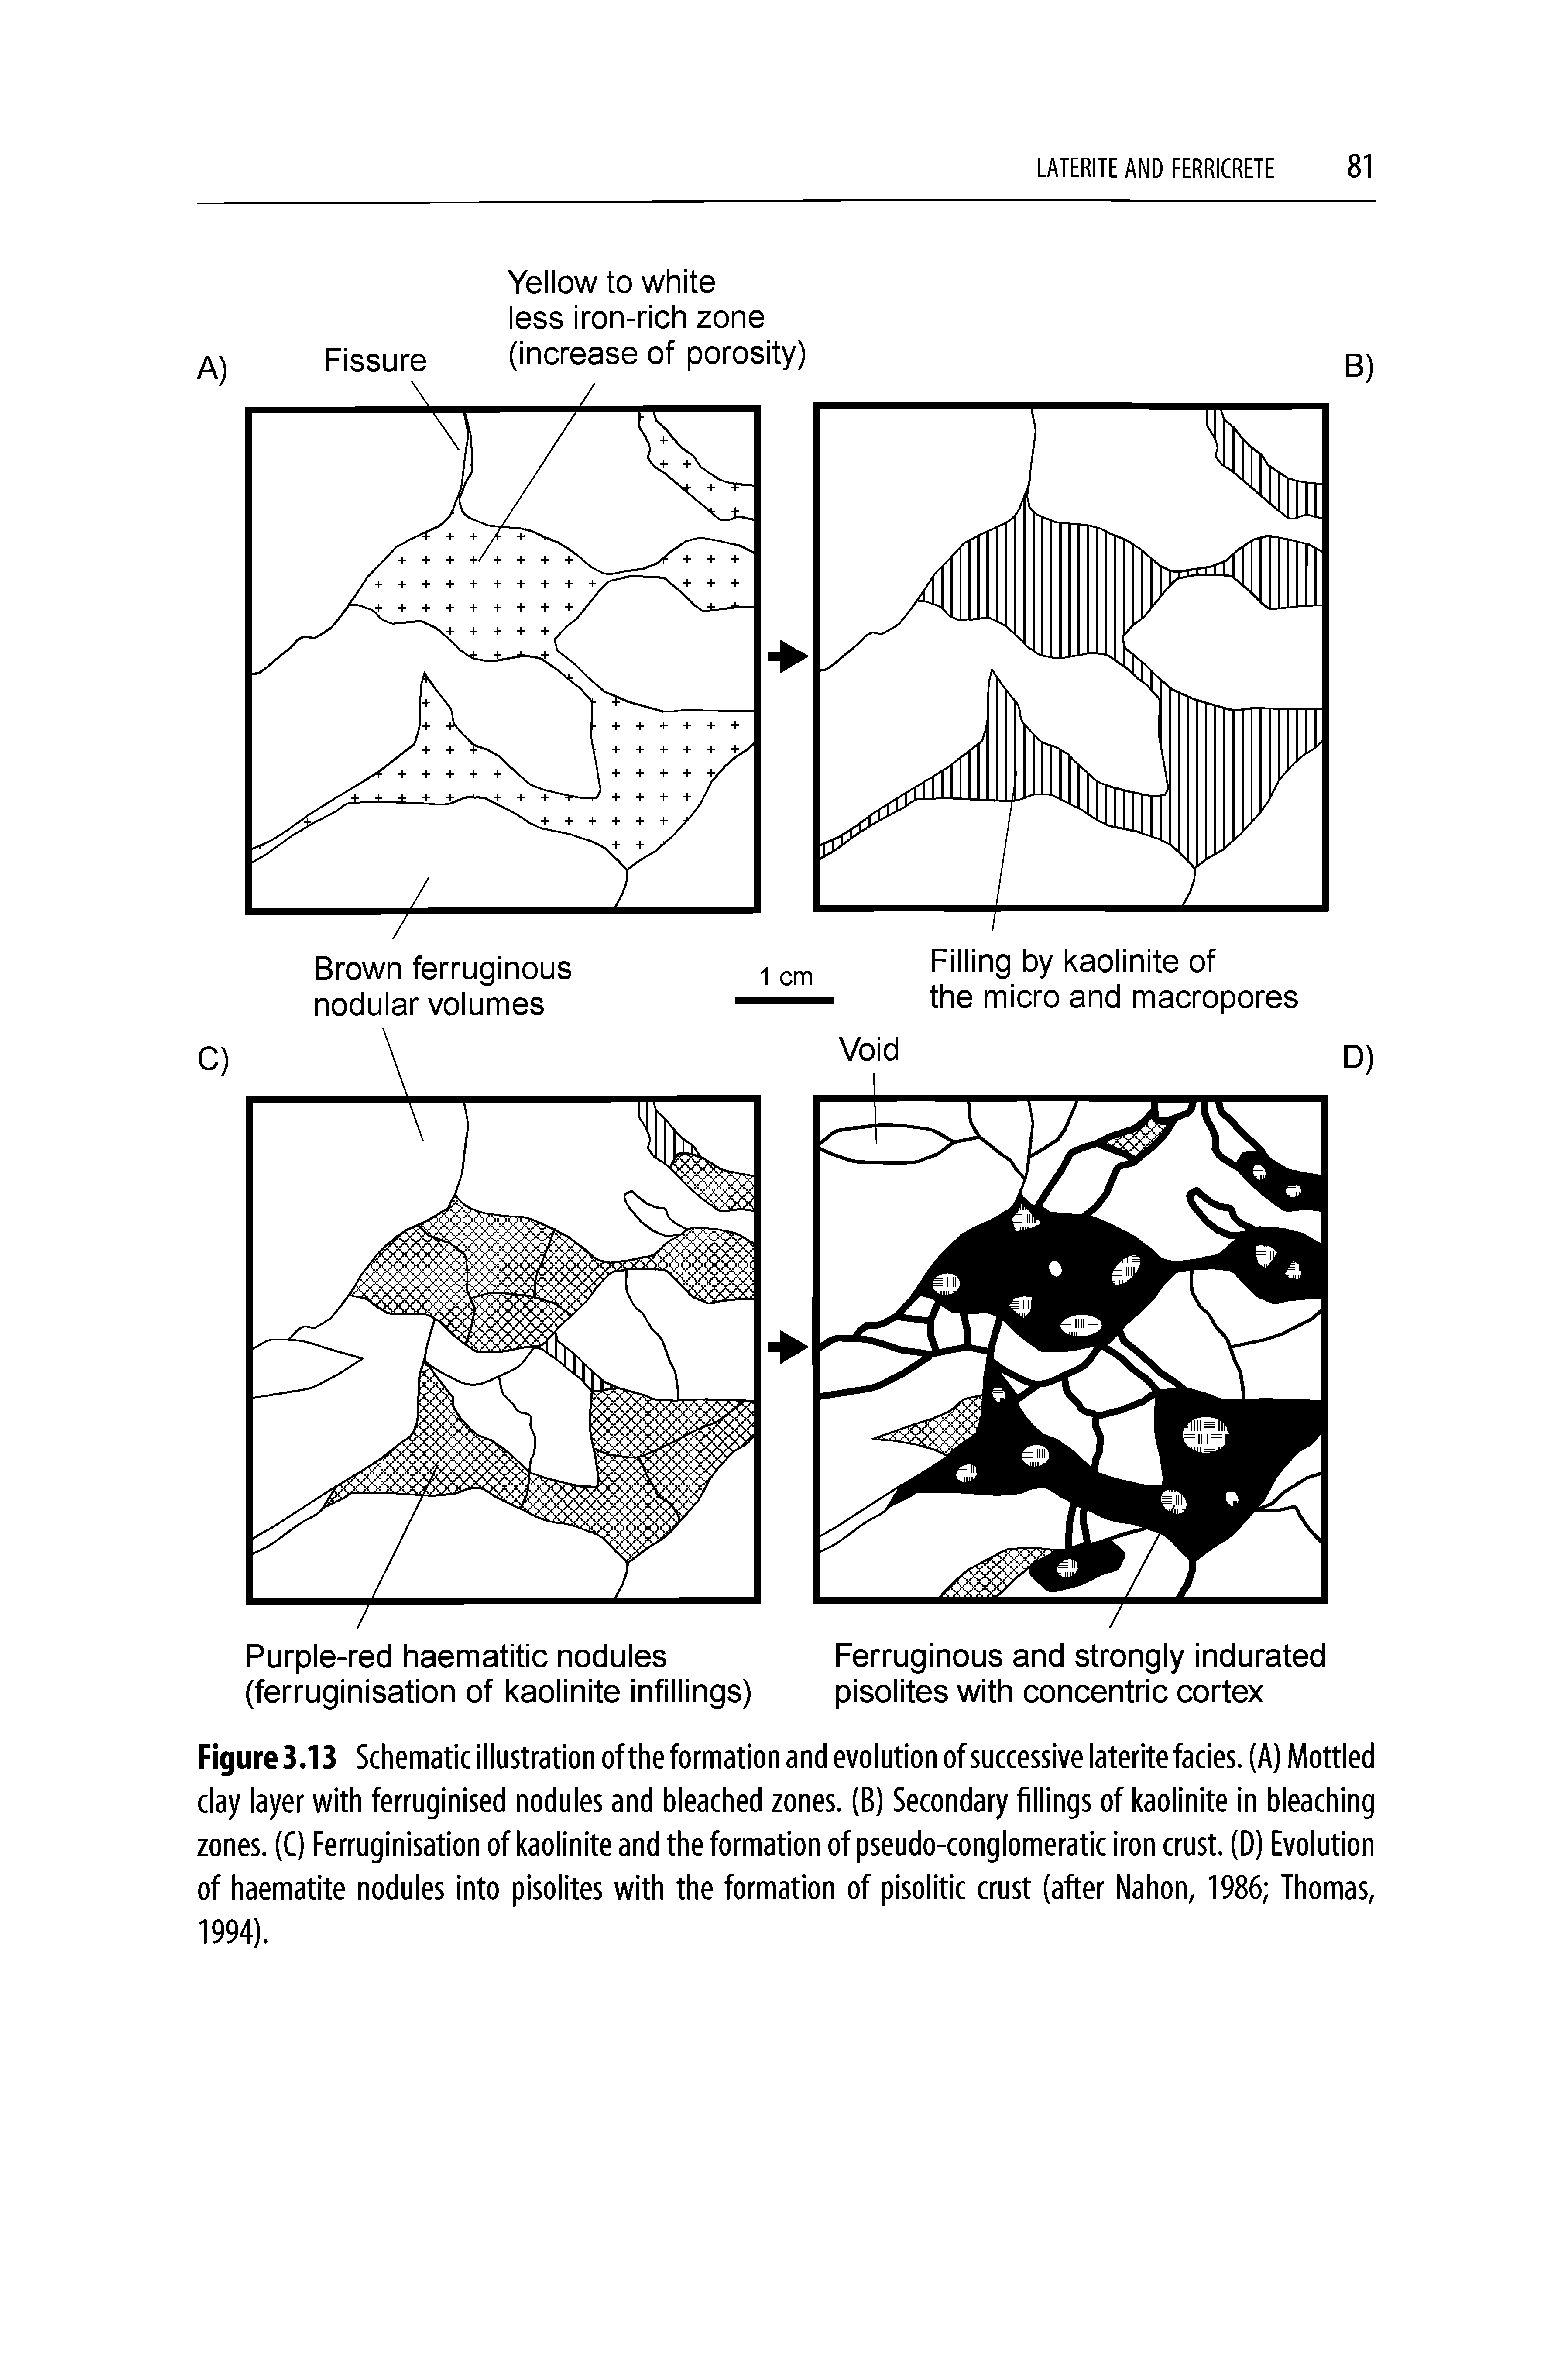 Figure 3.13 Schematic illustration of the formation and evolution of successive laterite facies. (A) Mottled clay layer with ferruginised nodules and bleached zones. (B) Secondary fillings of kaolinite in bleaching zones. (C) Ferruginisation of kaolinite and the formation of pseudo-conglomeratic iron crust. (D) Evolution of haematite nodules into pisolites with the formation of pisolitic crust (after Nahon, 1986 Thomas, 1994).